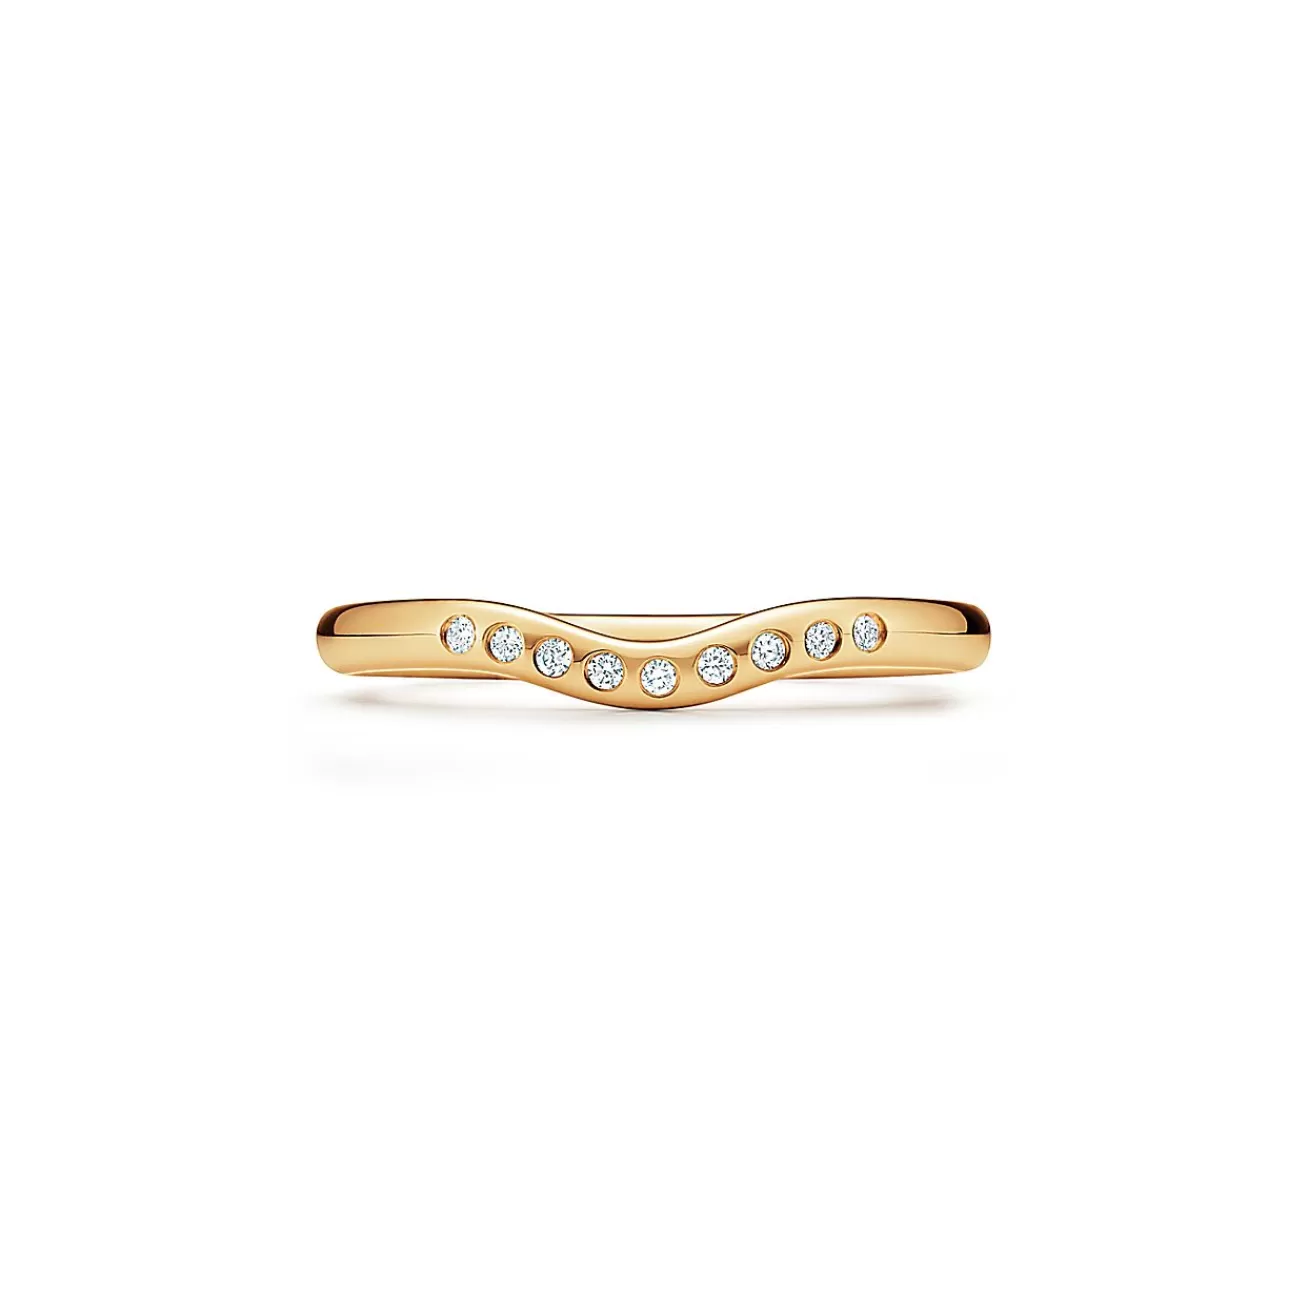 Tiffany & Co. Elsa Peretti® wedding band ring with diamonds in 18k gold, 2 mm wide. | ^ Rings | Stacking Rings